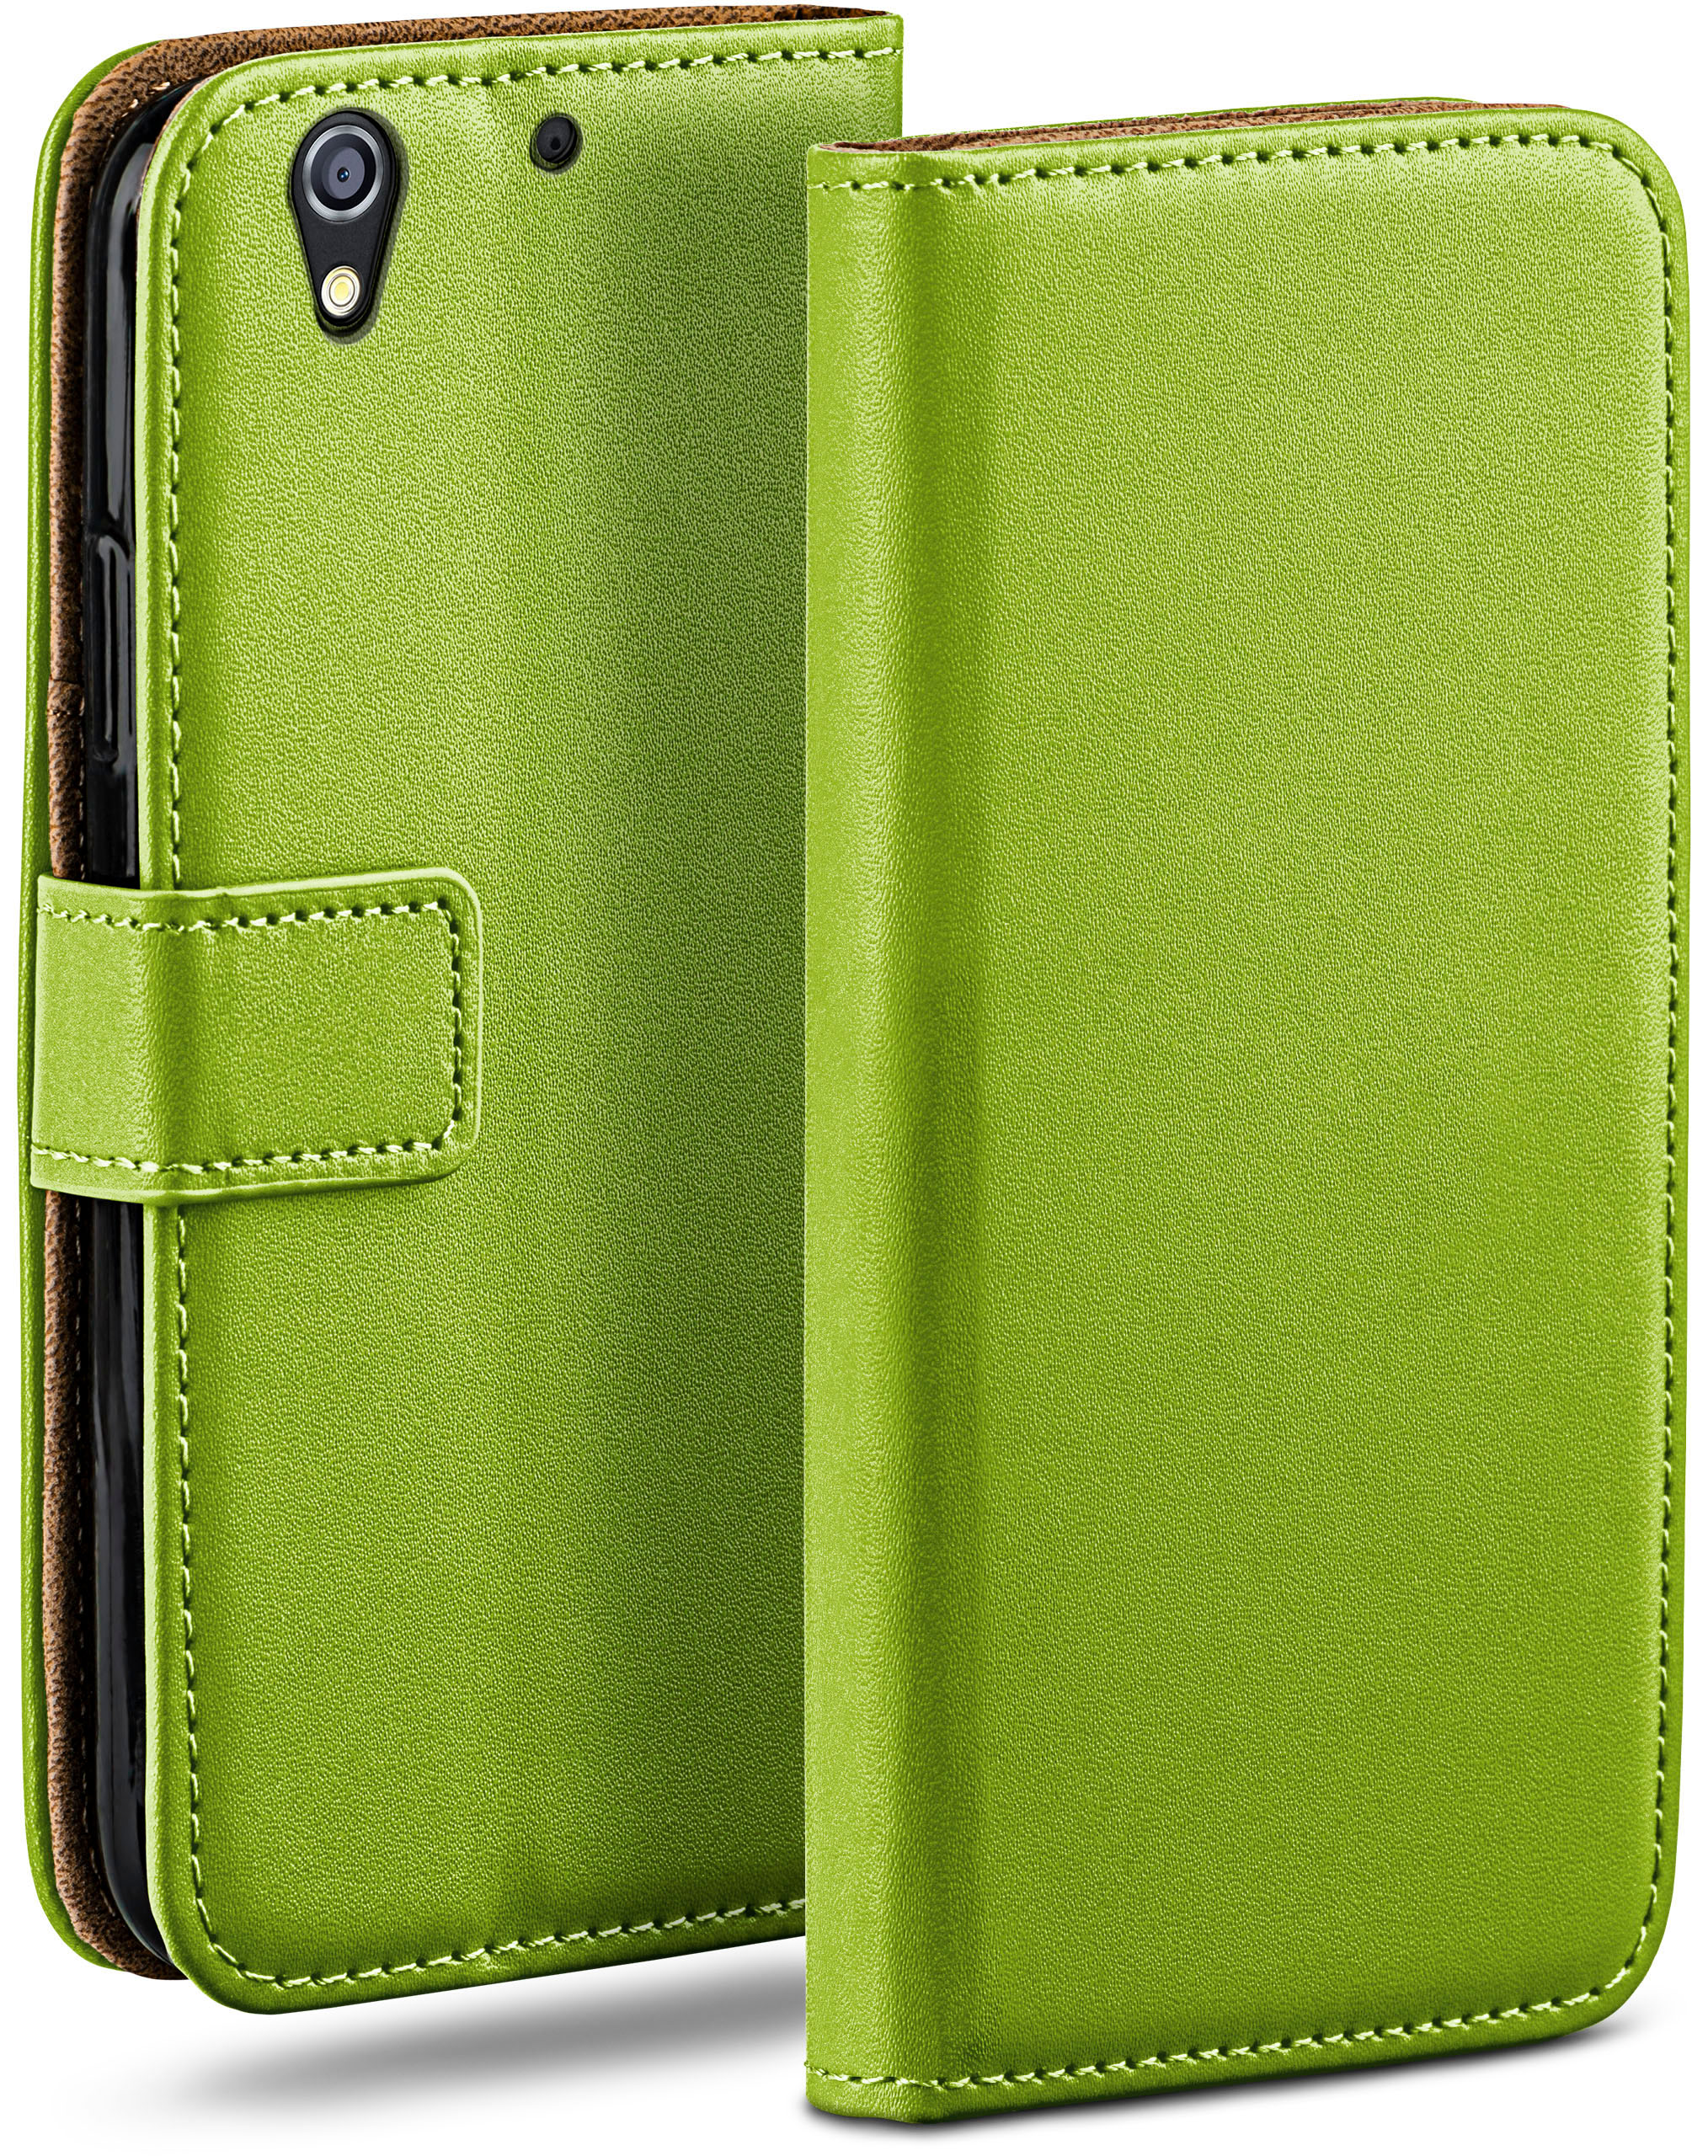 MOEX Book Case, Bookcover, HTC, Lime-Green 626G, Desire